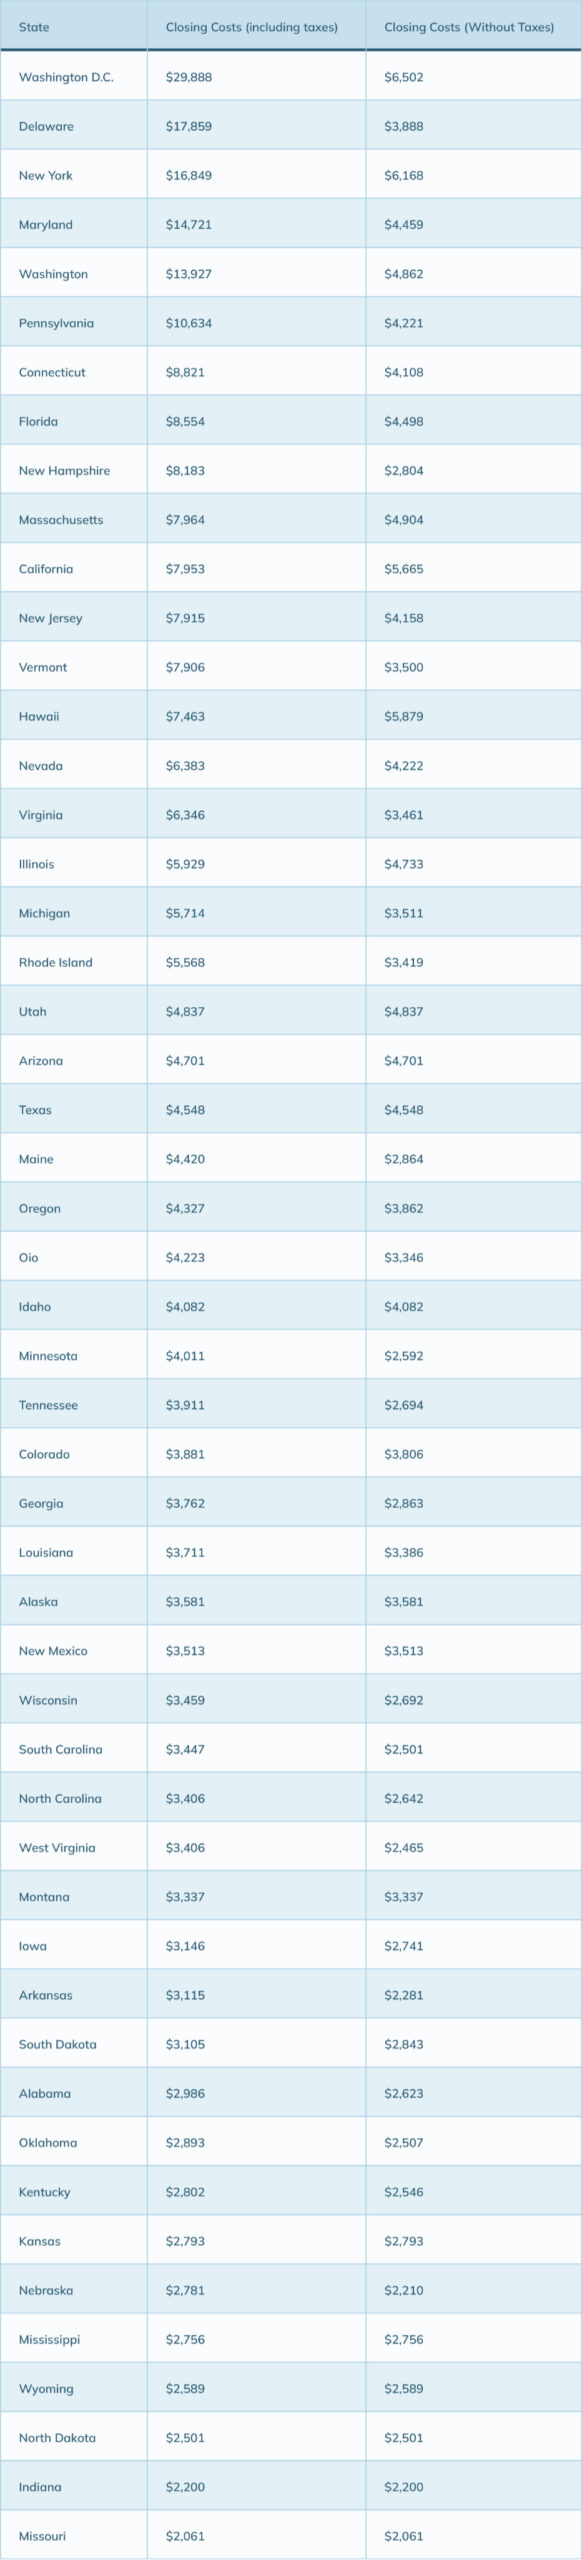 What States Have The Highest/Lowest Closing Costs?